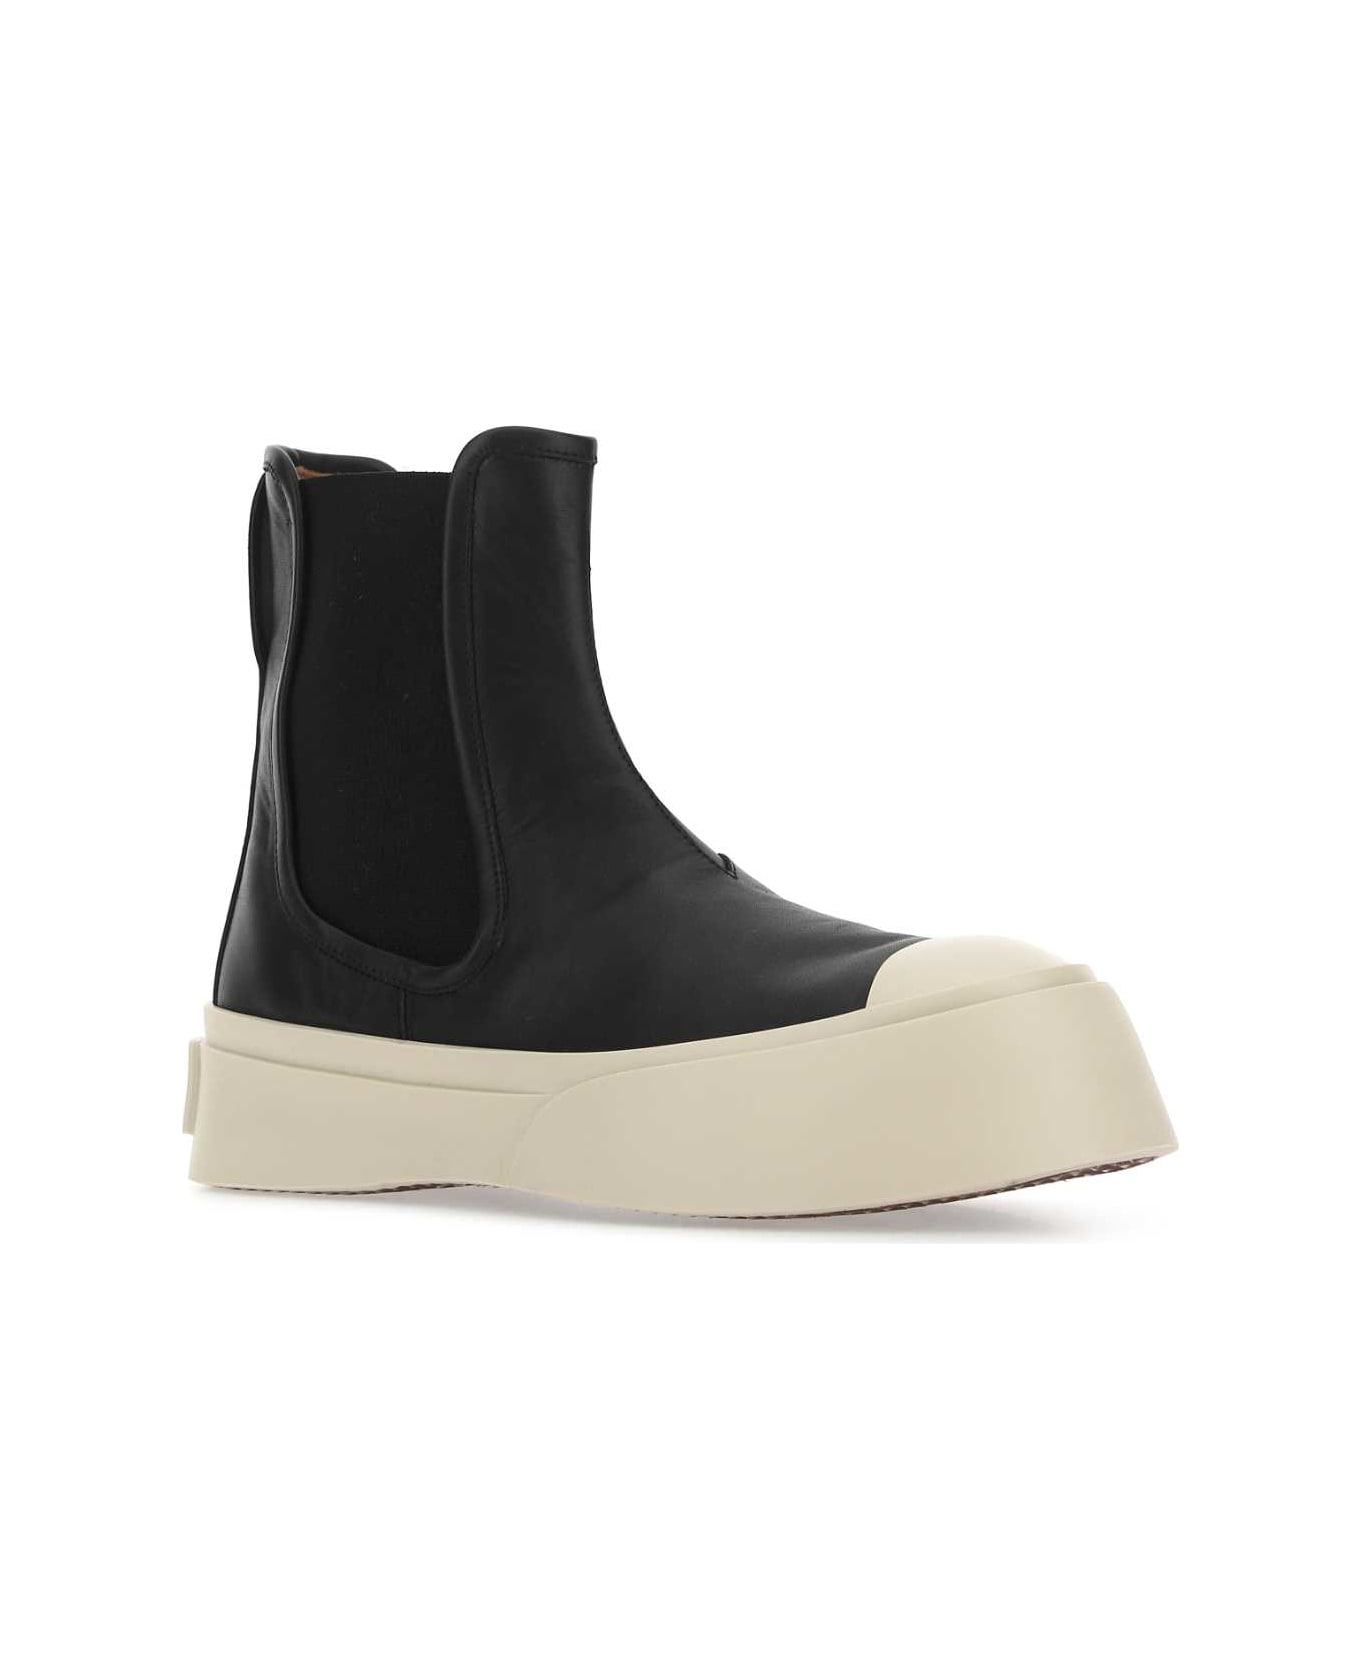 Marni Black Nappa Leather Pablo Ankle Boots - 00N99